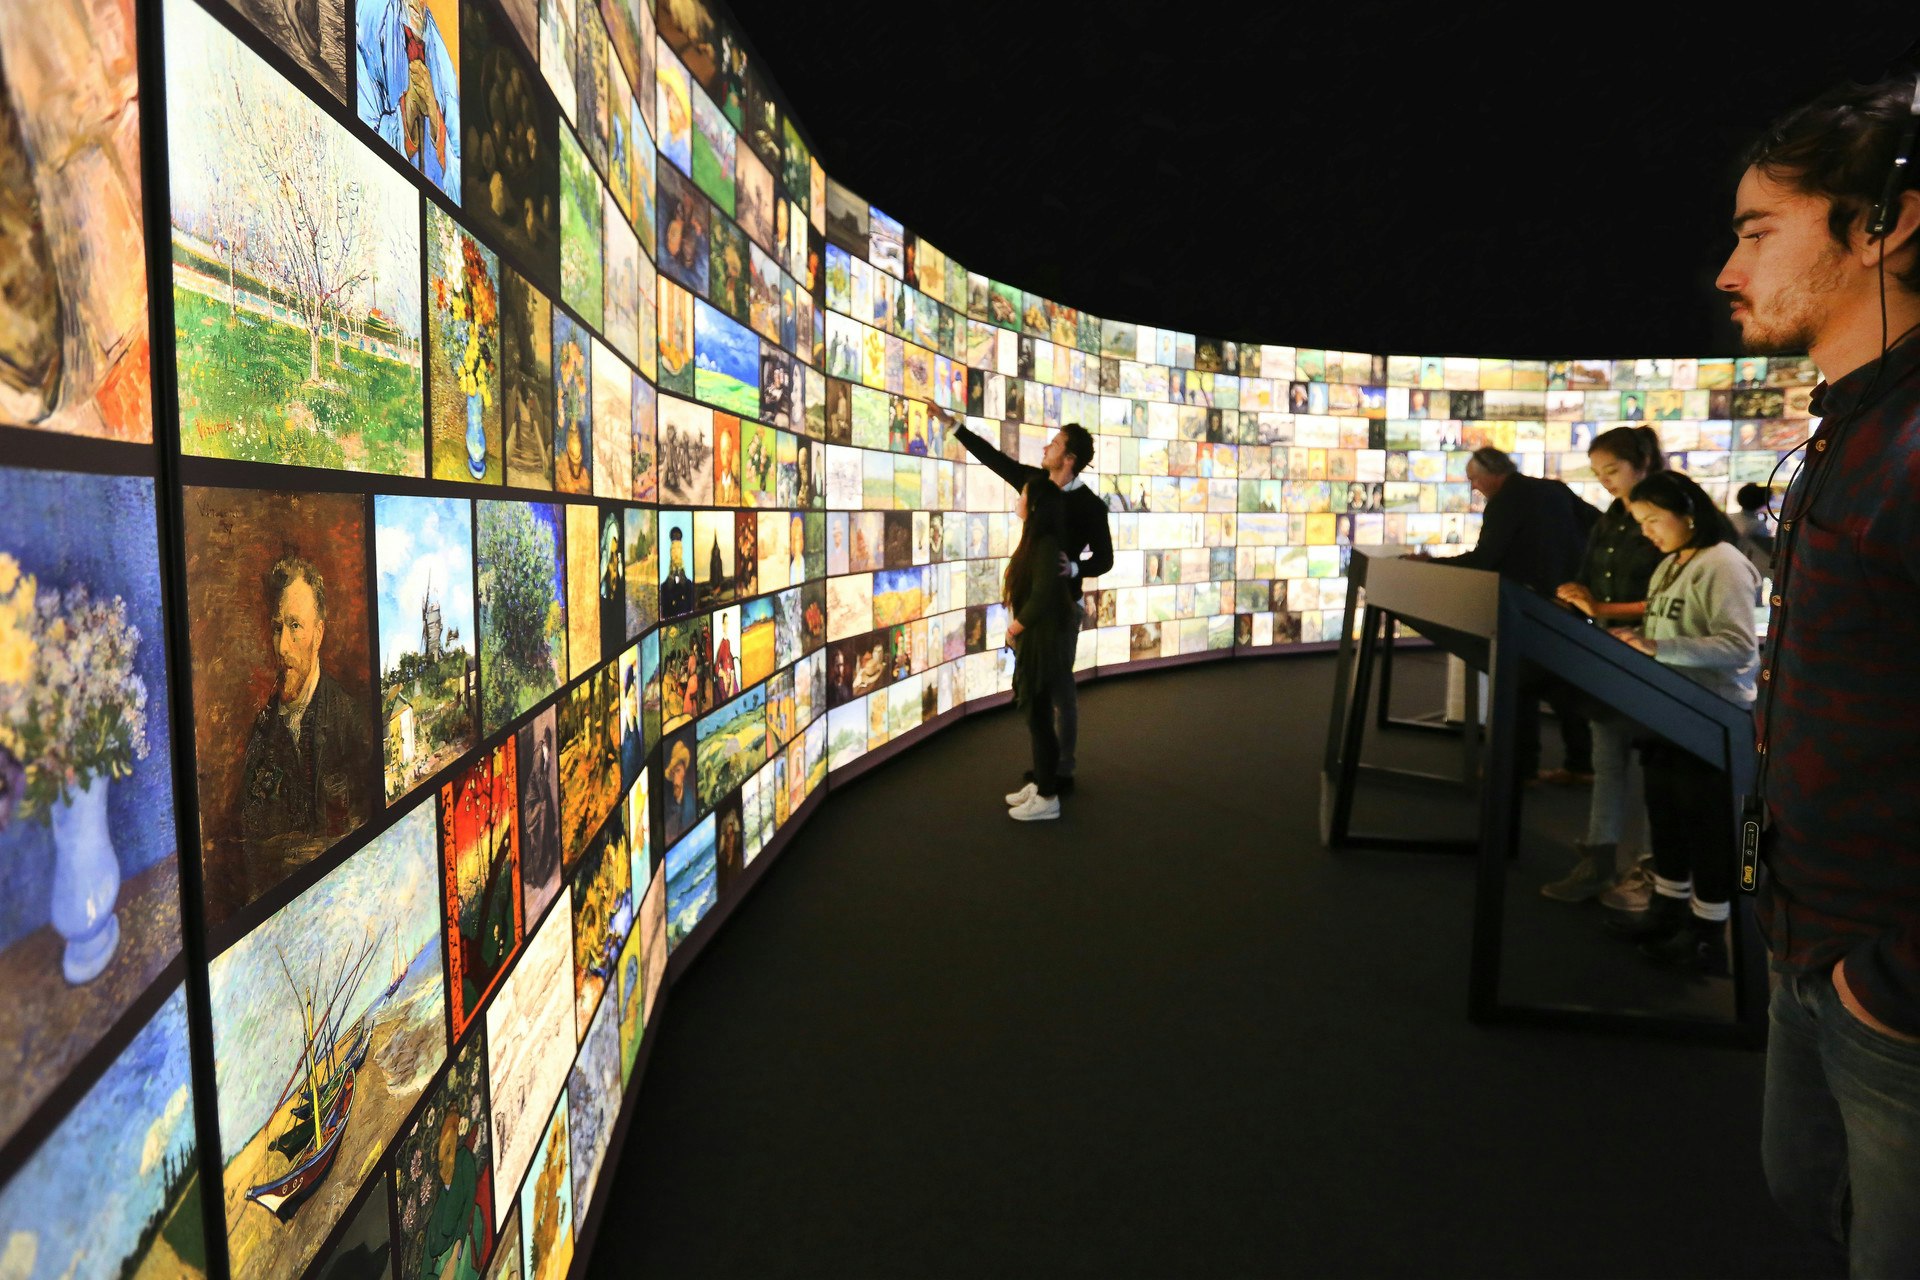 Installation view of Meet Vincent van Gogh - people looking at a wall of screens with Van Gogh's artwork